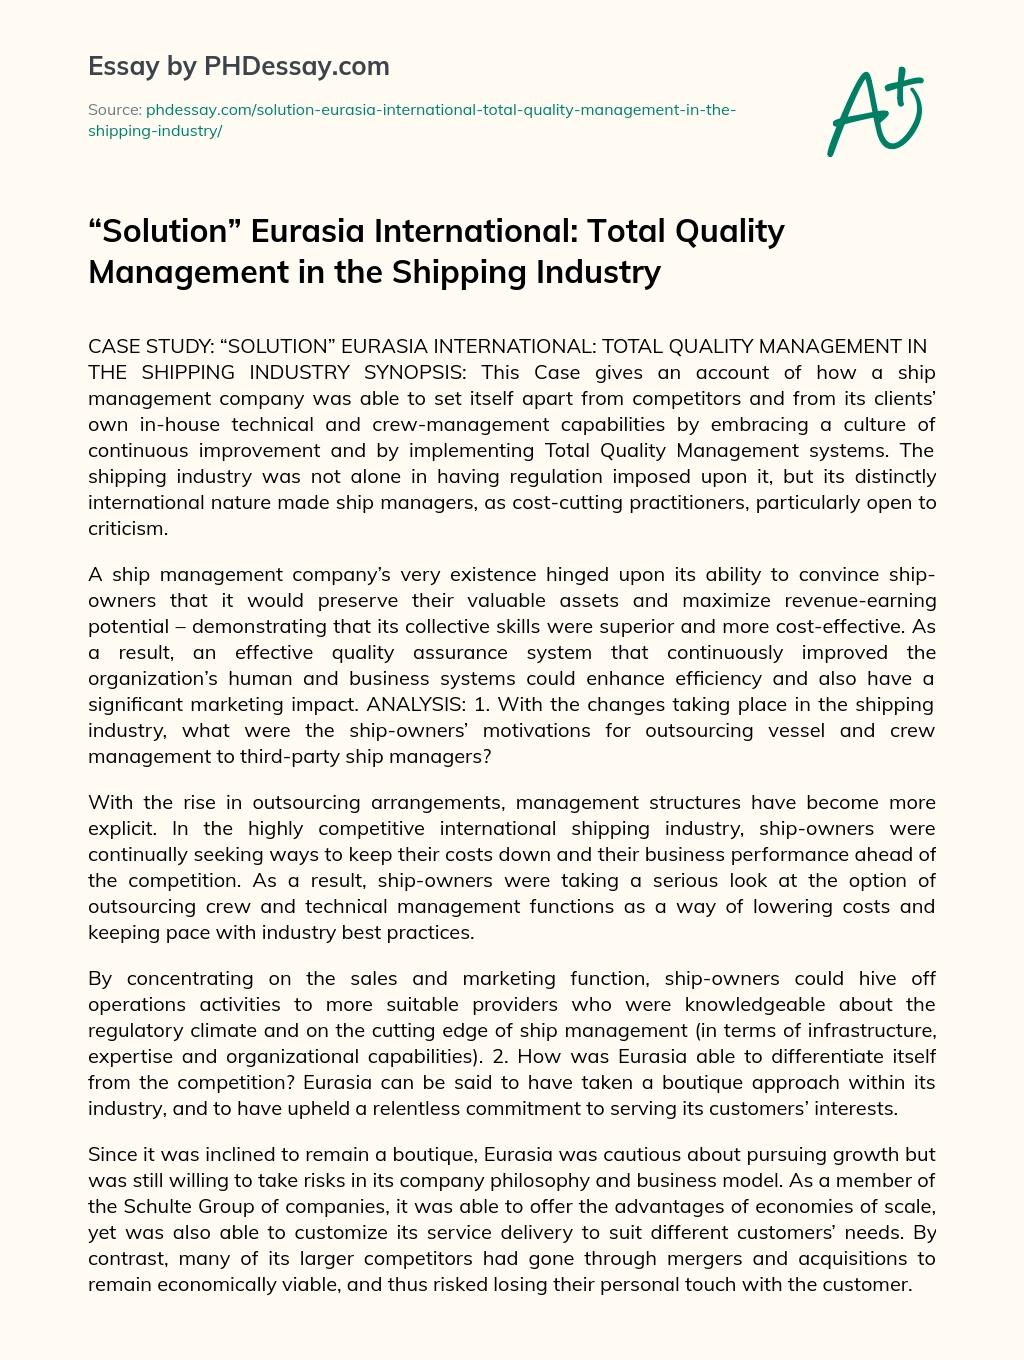 Solution Eurasia International: Total Quality Management in the Shipping Industry essay